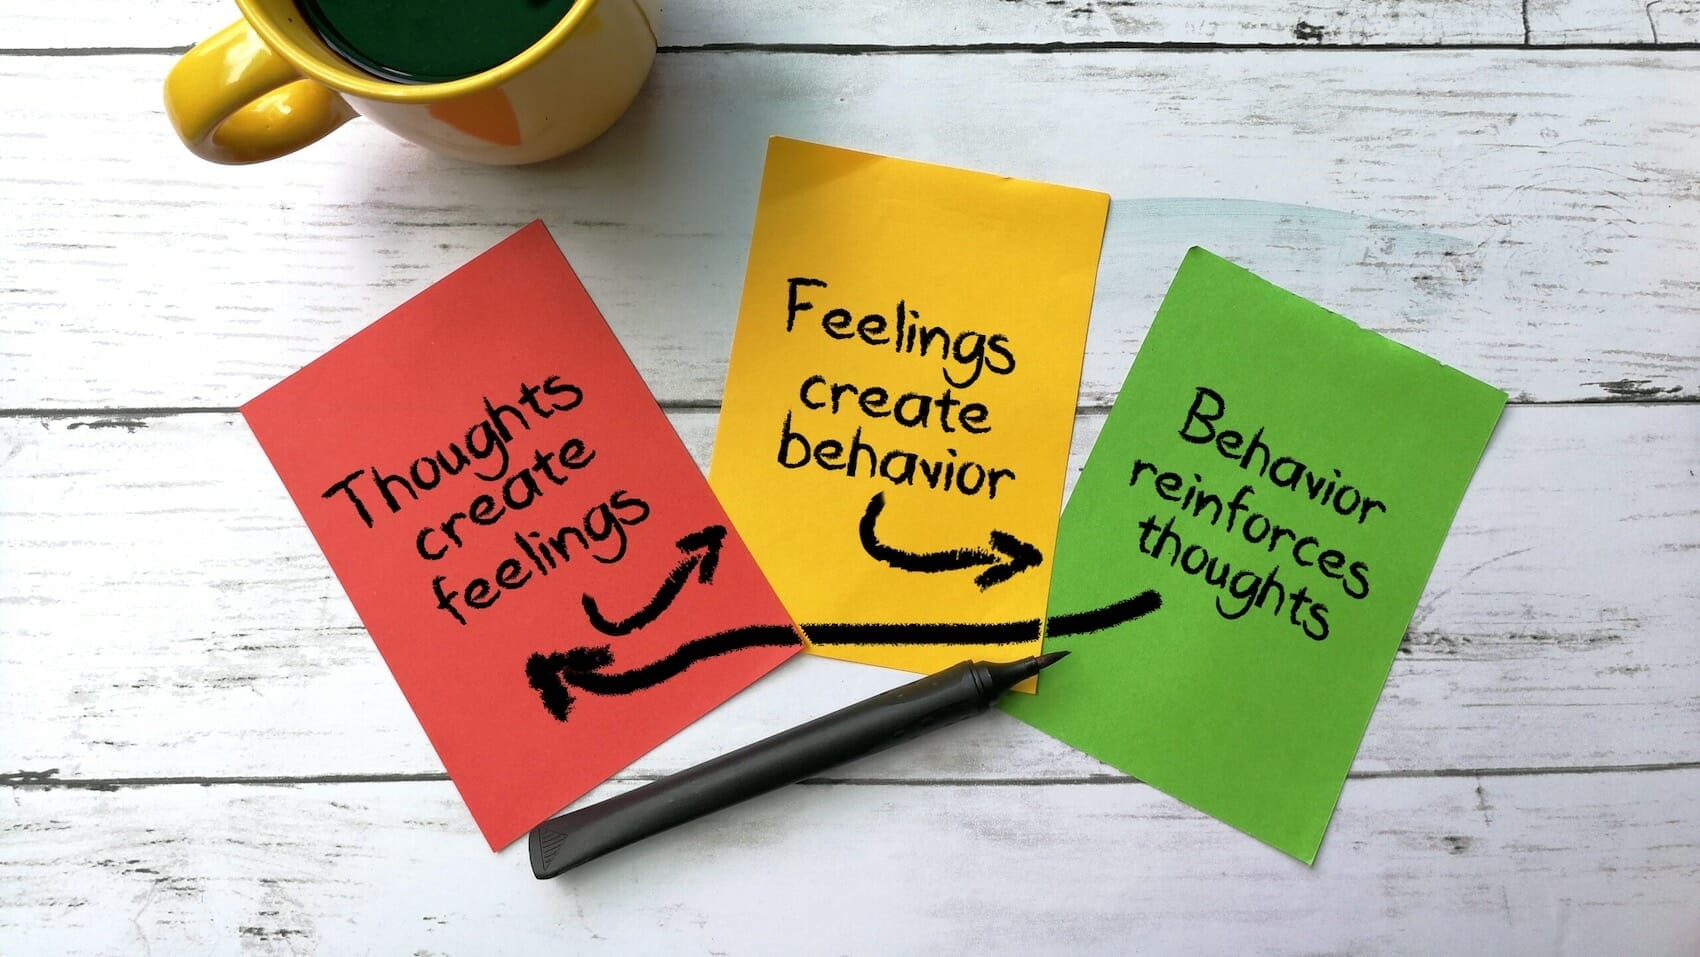 Cognitive Behavior Therapy concept